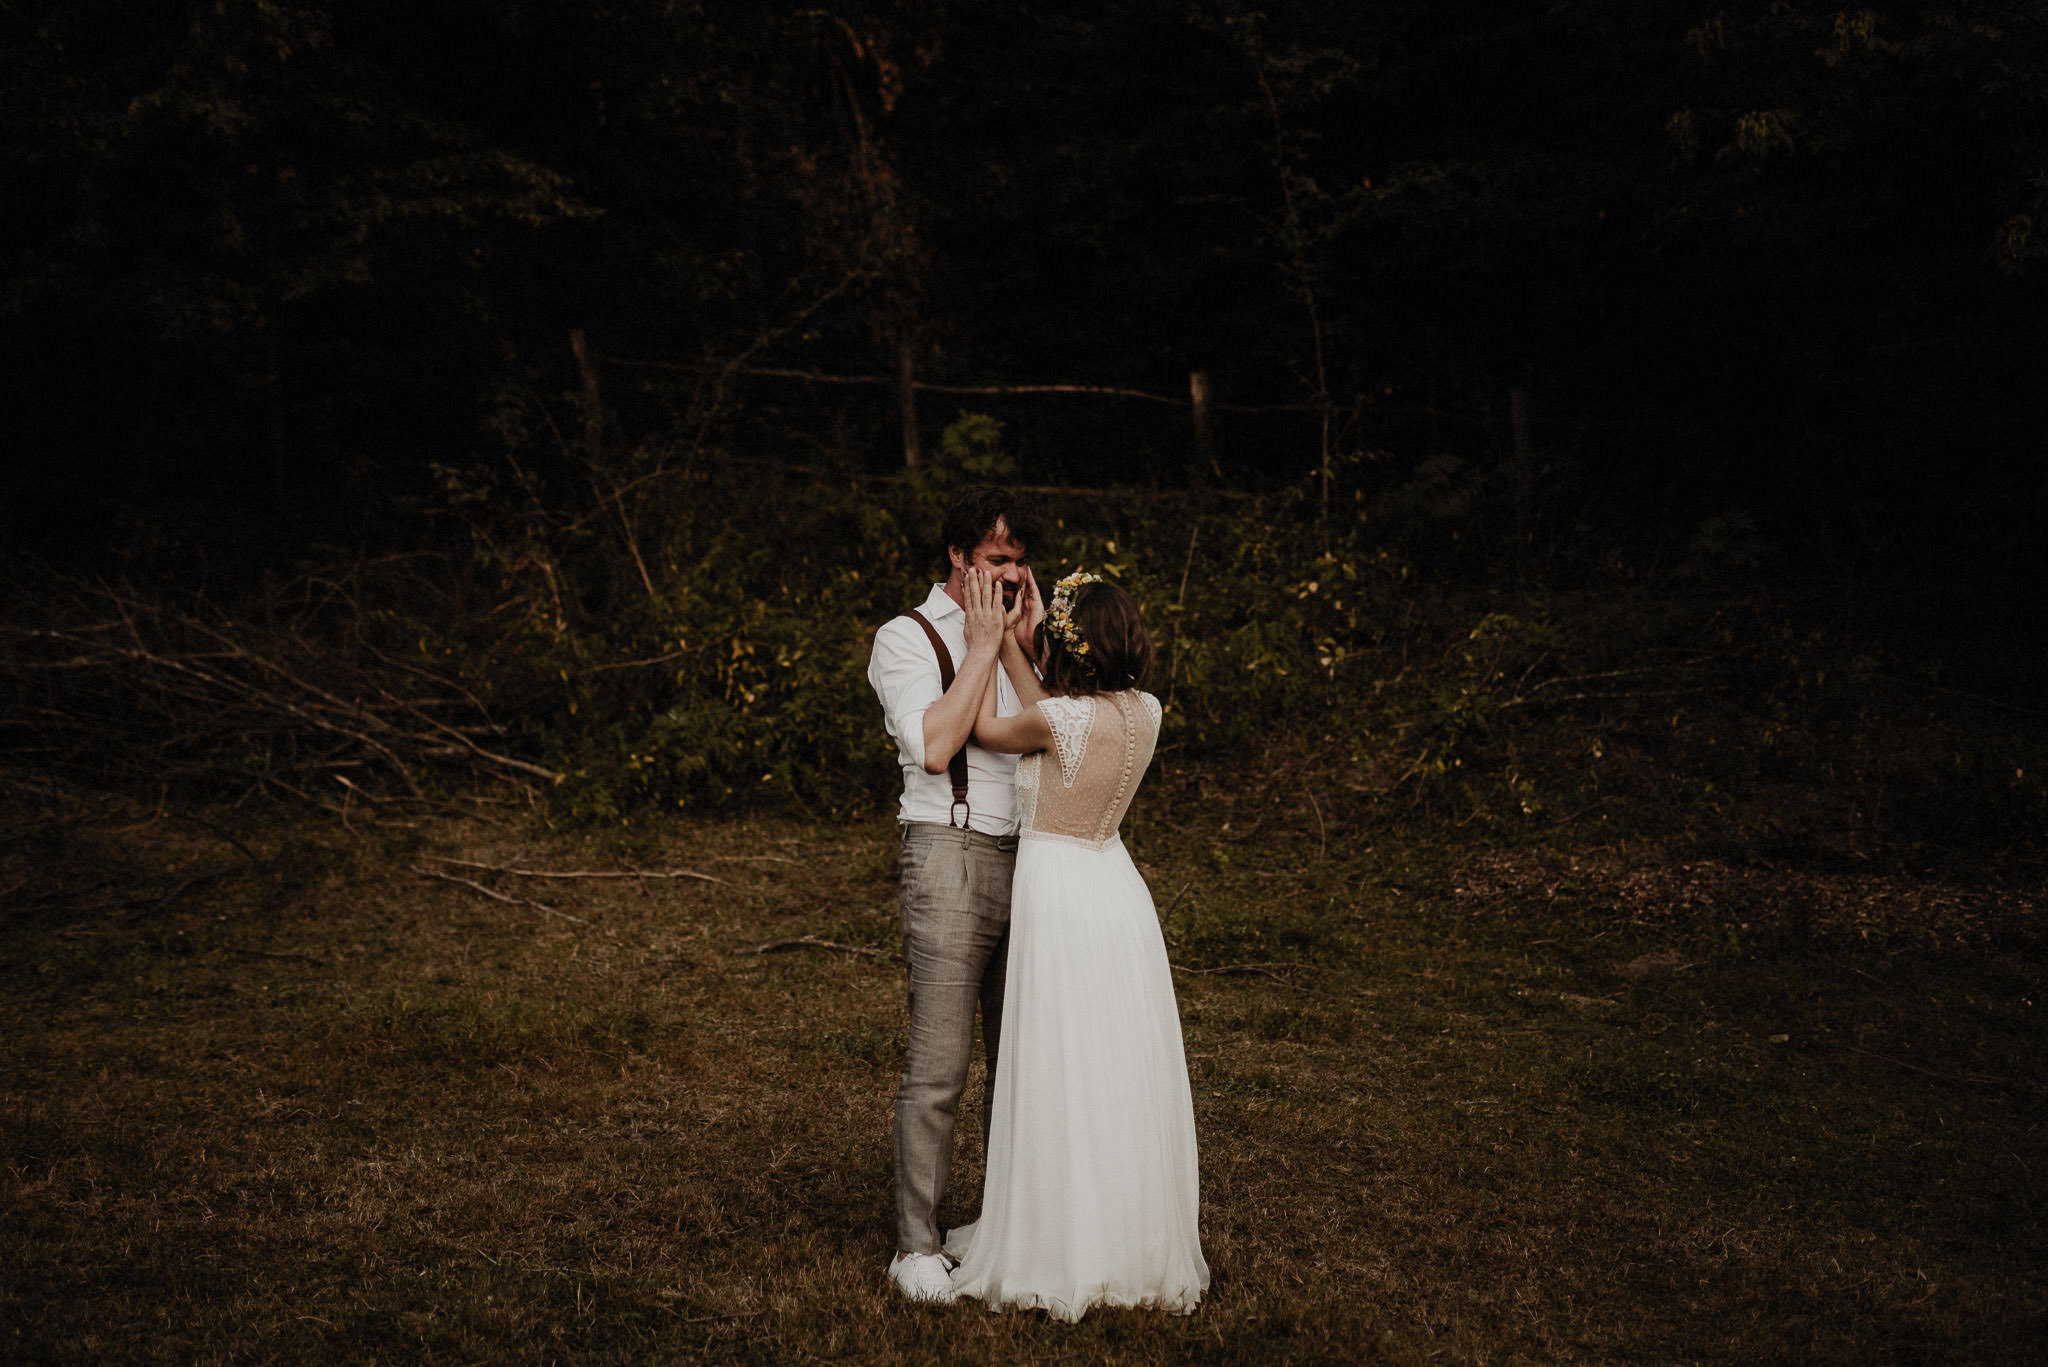 romantic moment between bride and groom in the forest